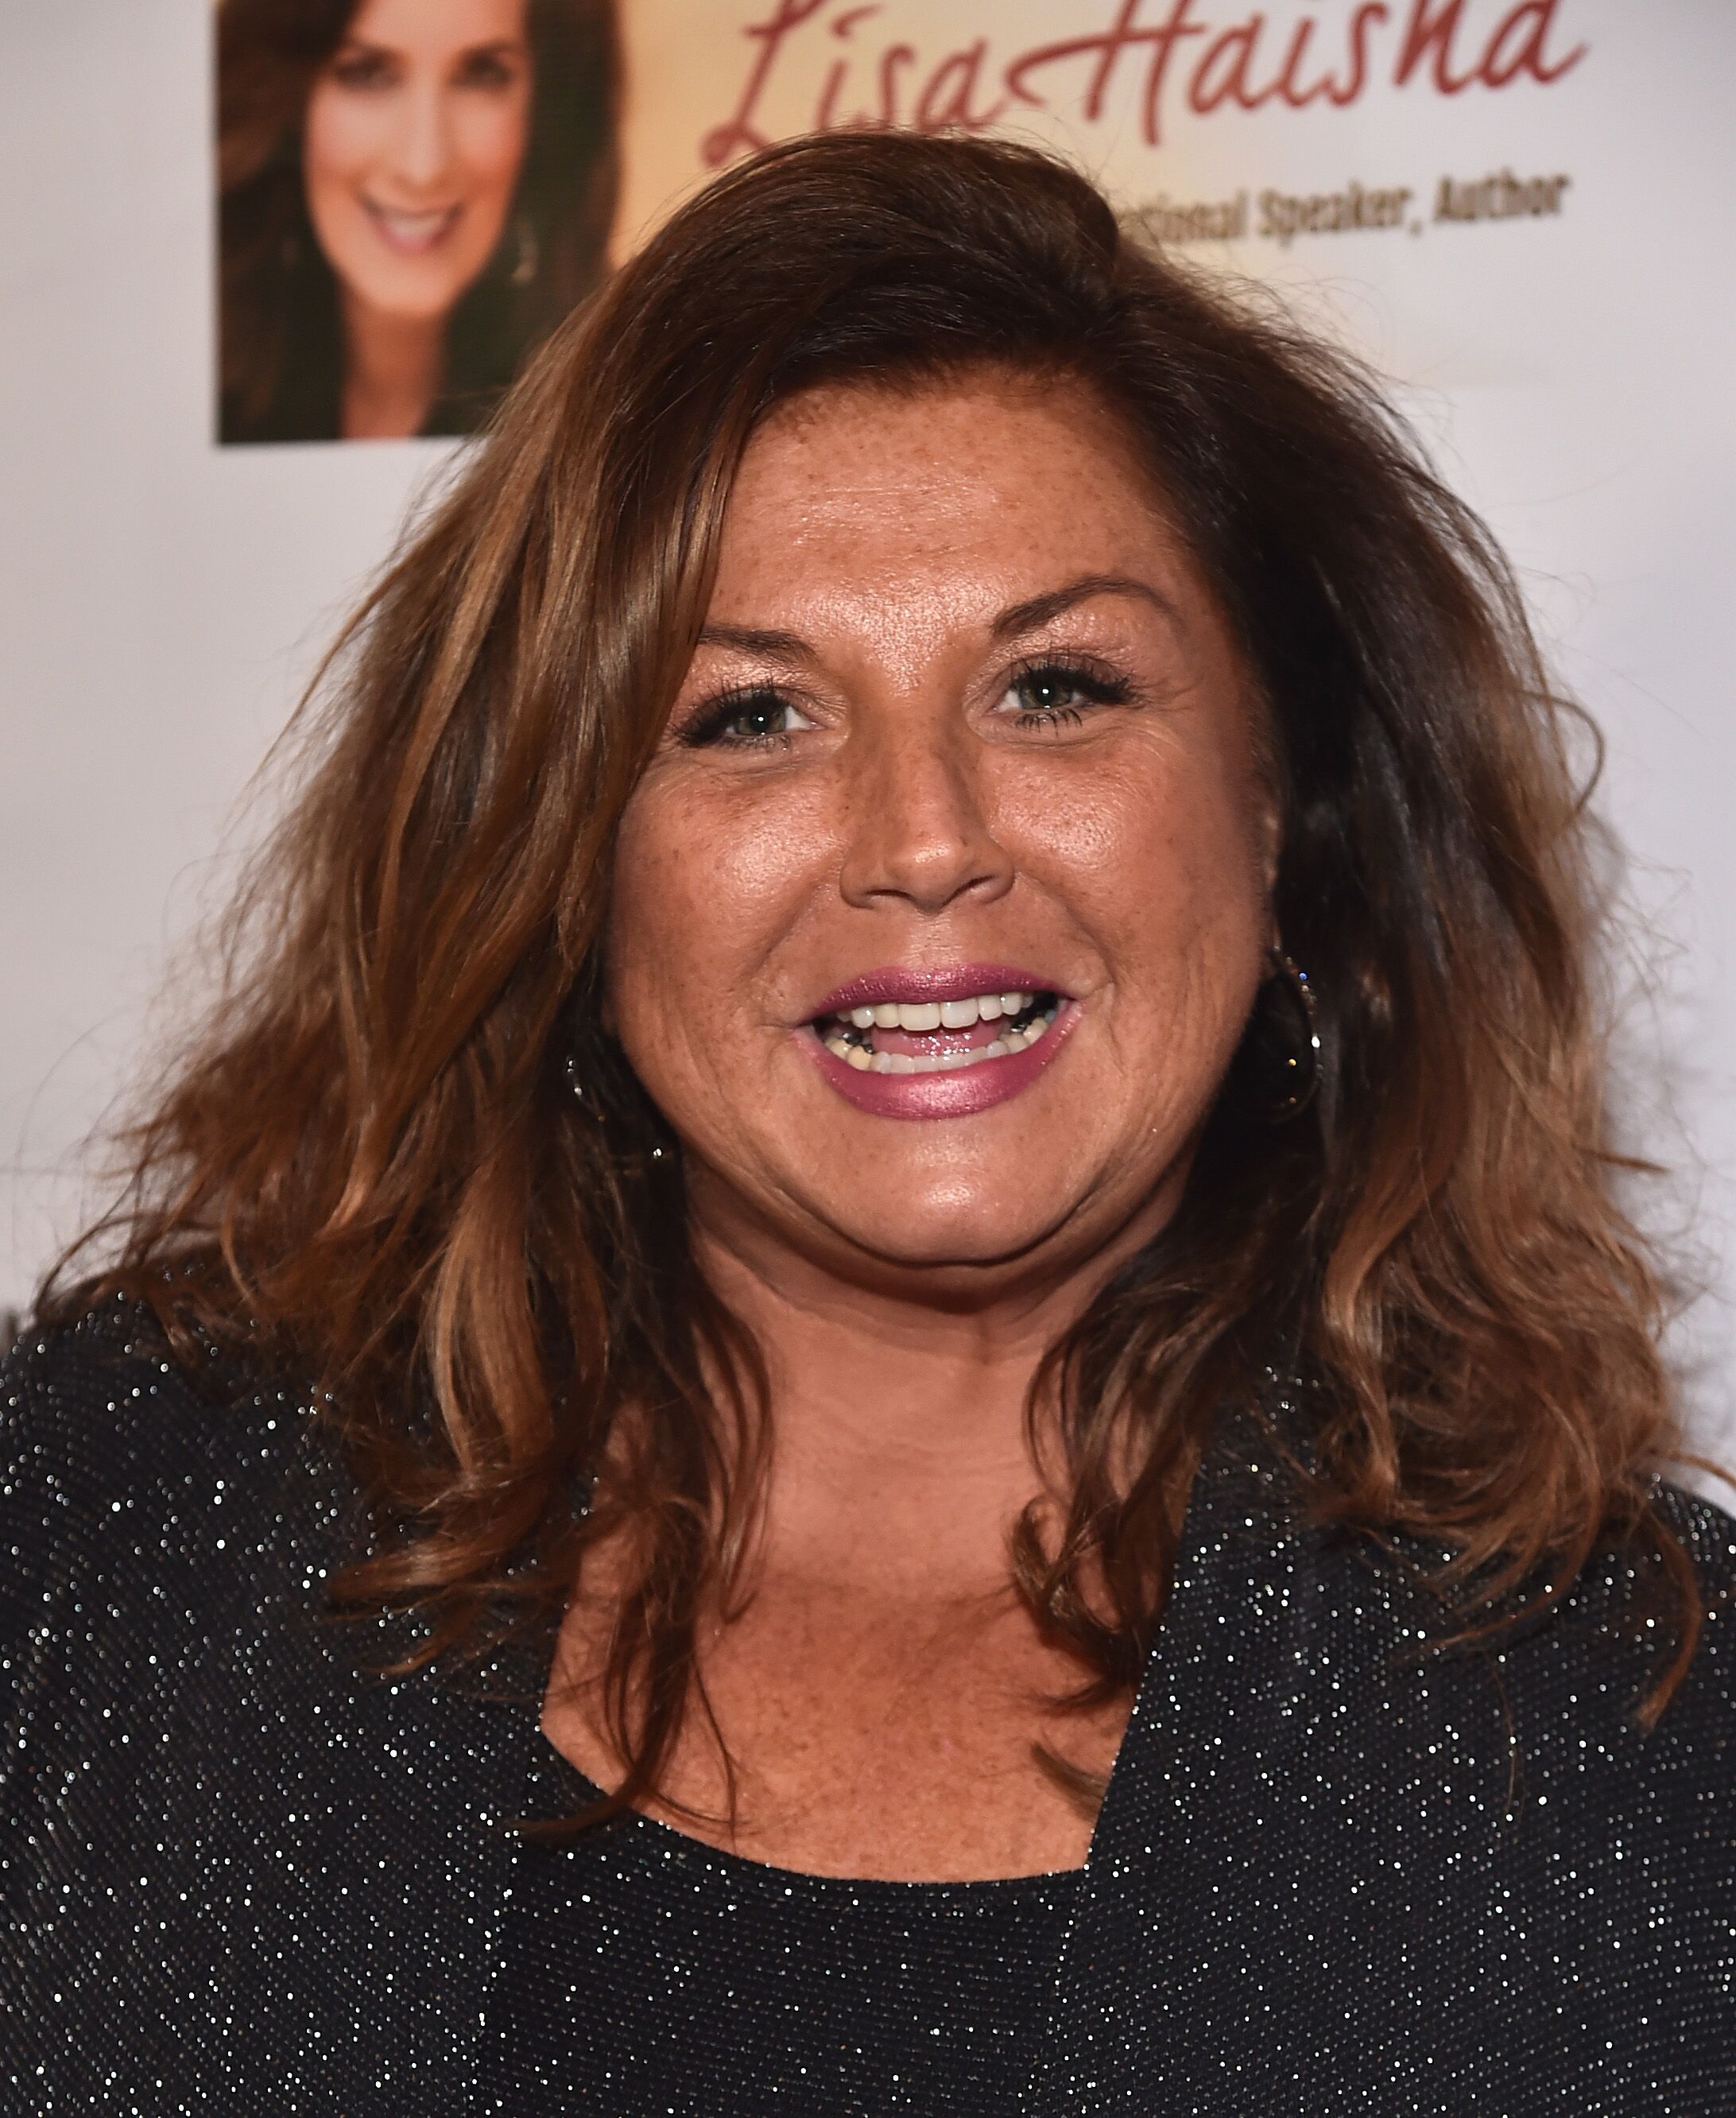 Abby Lee Miller at the 3rd Annual Whispers From Children's Heats Foundation Legacy Charity Gala on March 24, 2017, in Santa Monica, California | Photo: Alberto E. Rodriguez/Getty Images